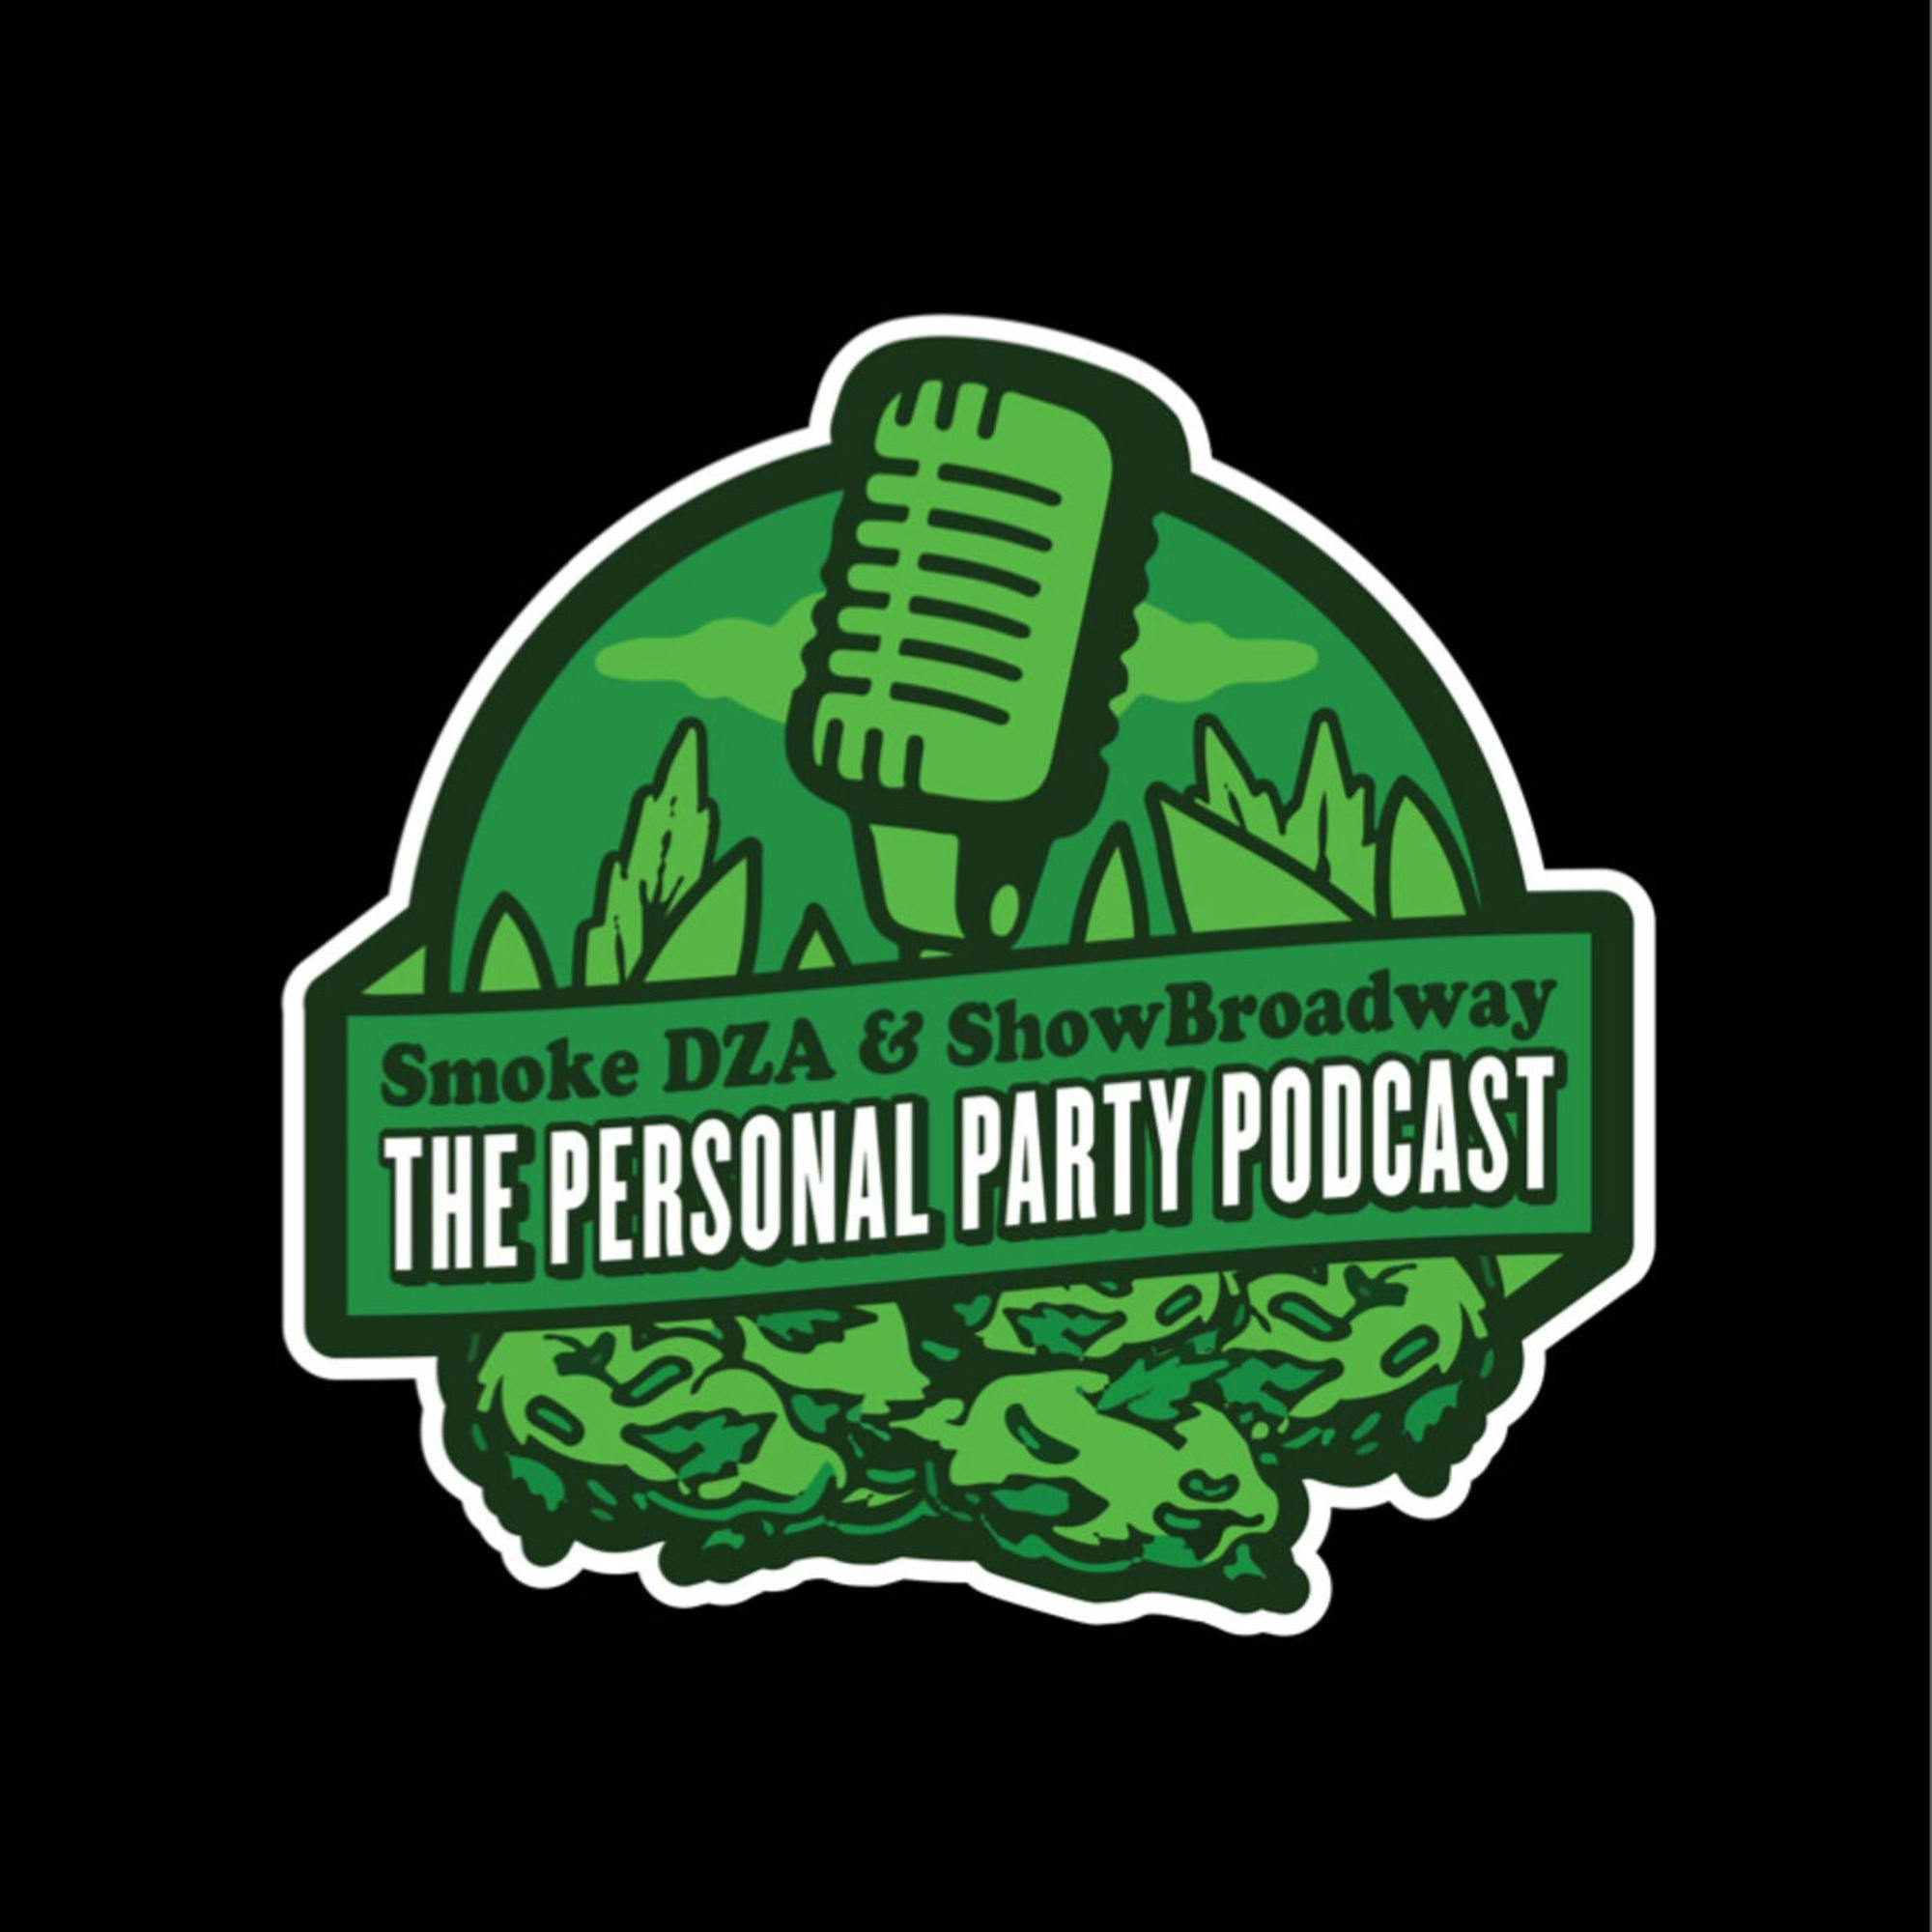 The Personal Party Podcast - "Whats Next?" Ft. Dj Self Episode 055 Image